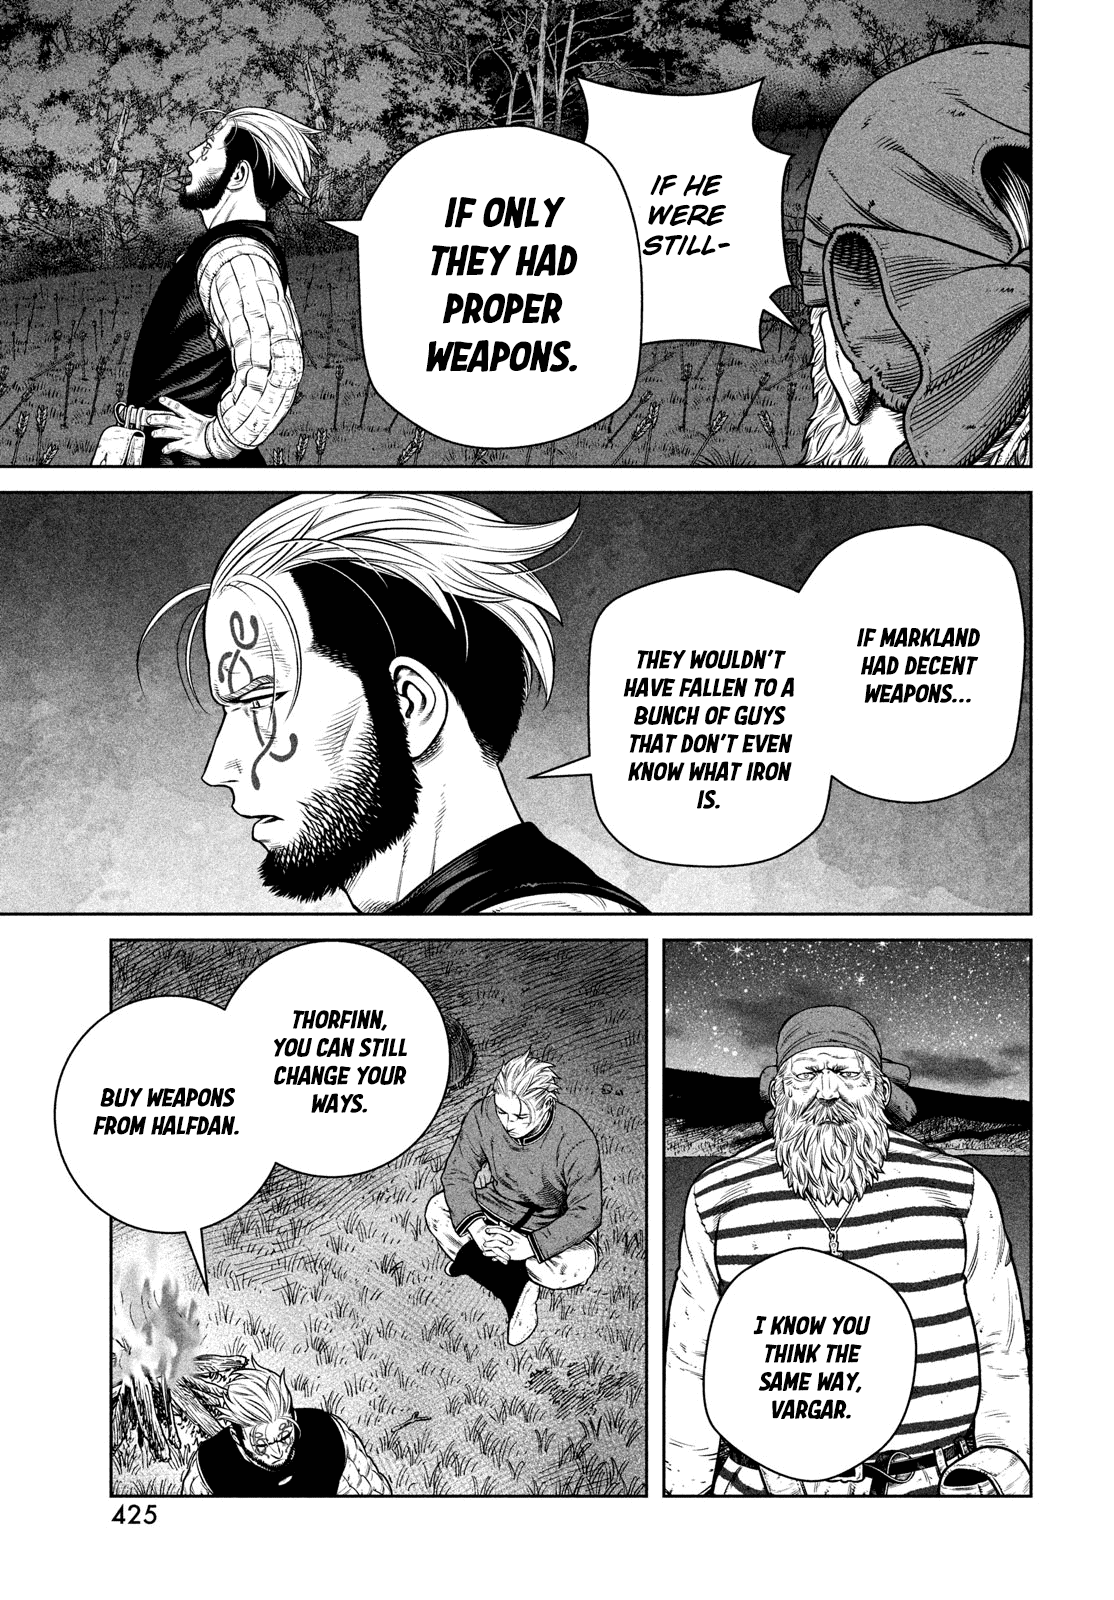 Vinland Saga Chapter 193 Release Date, Speculations, and Other Details